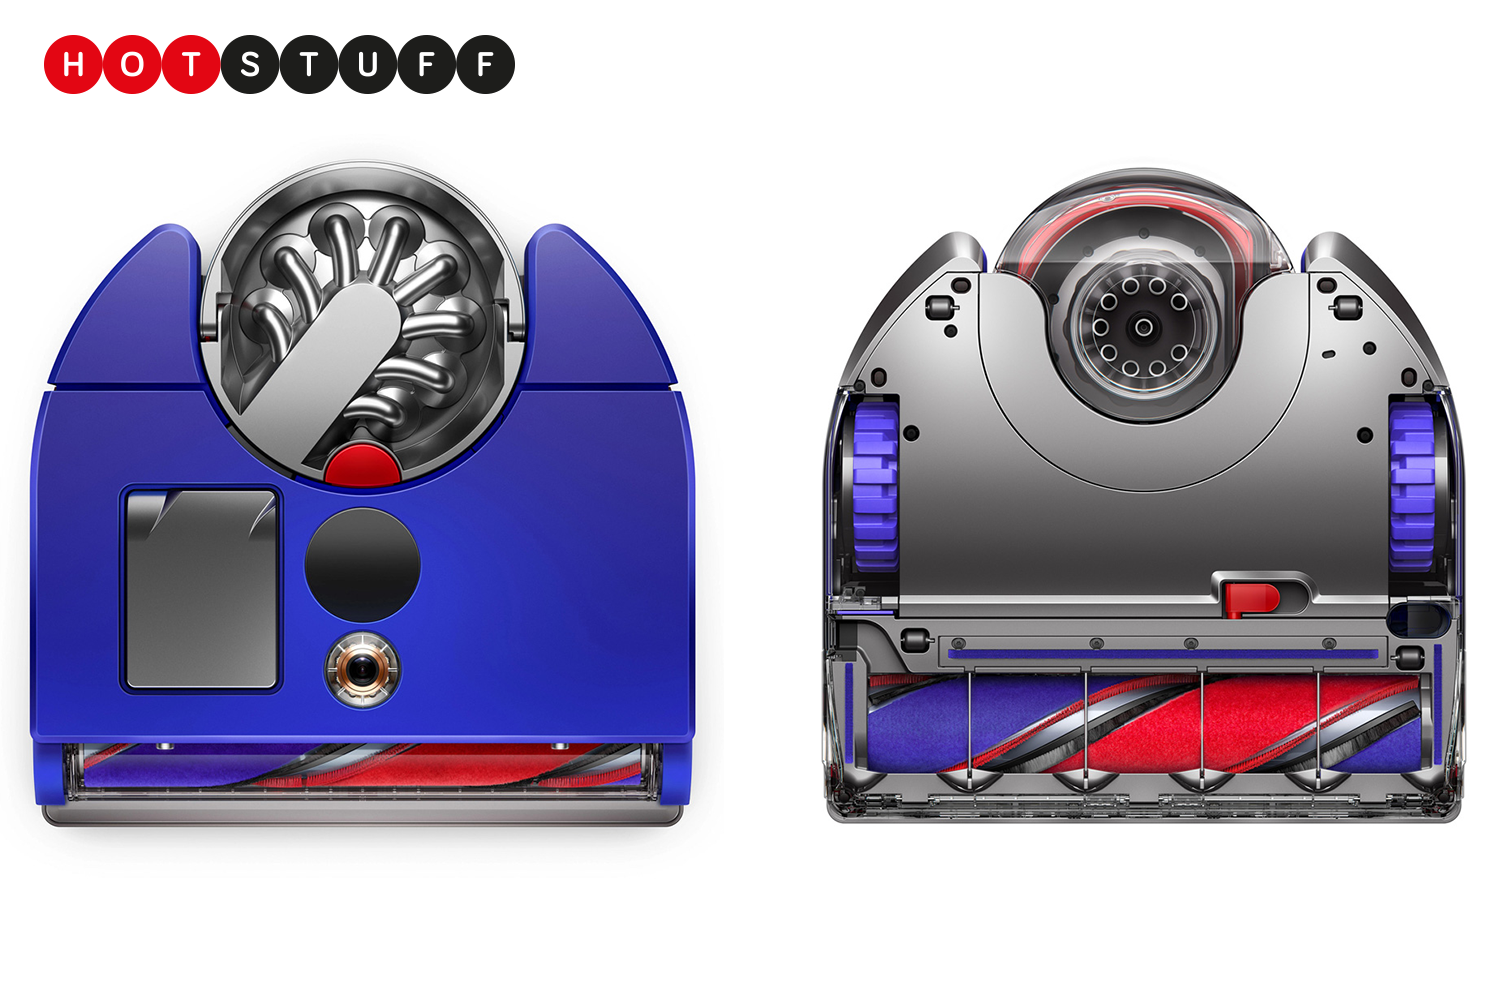 Dyson's Vis Nav is a complete of its vacuum, claims six the suction of others | Stuff